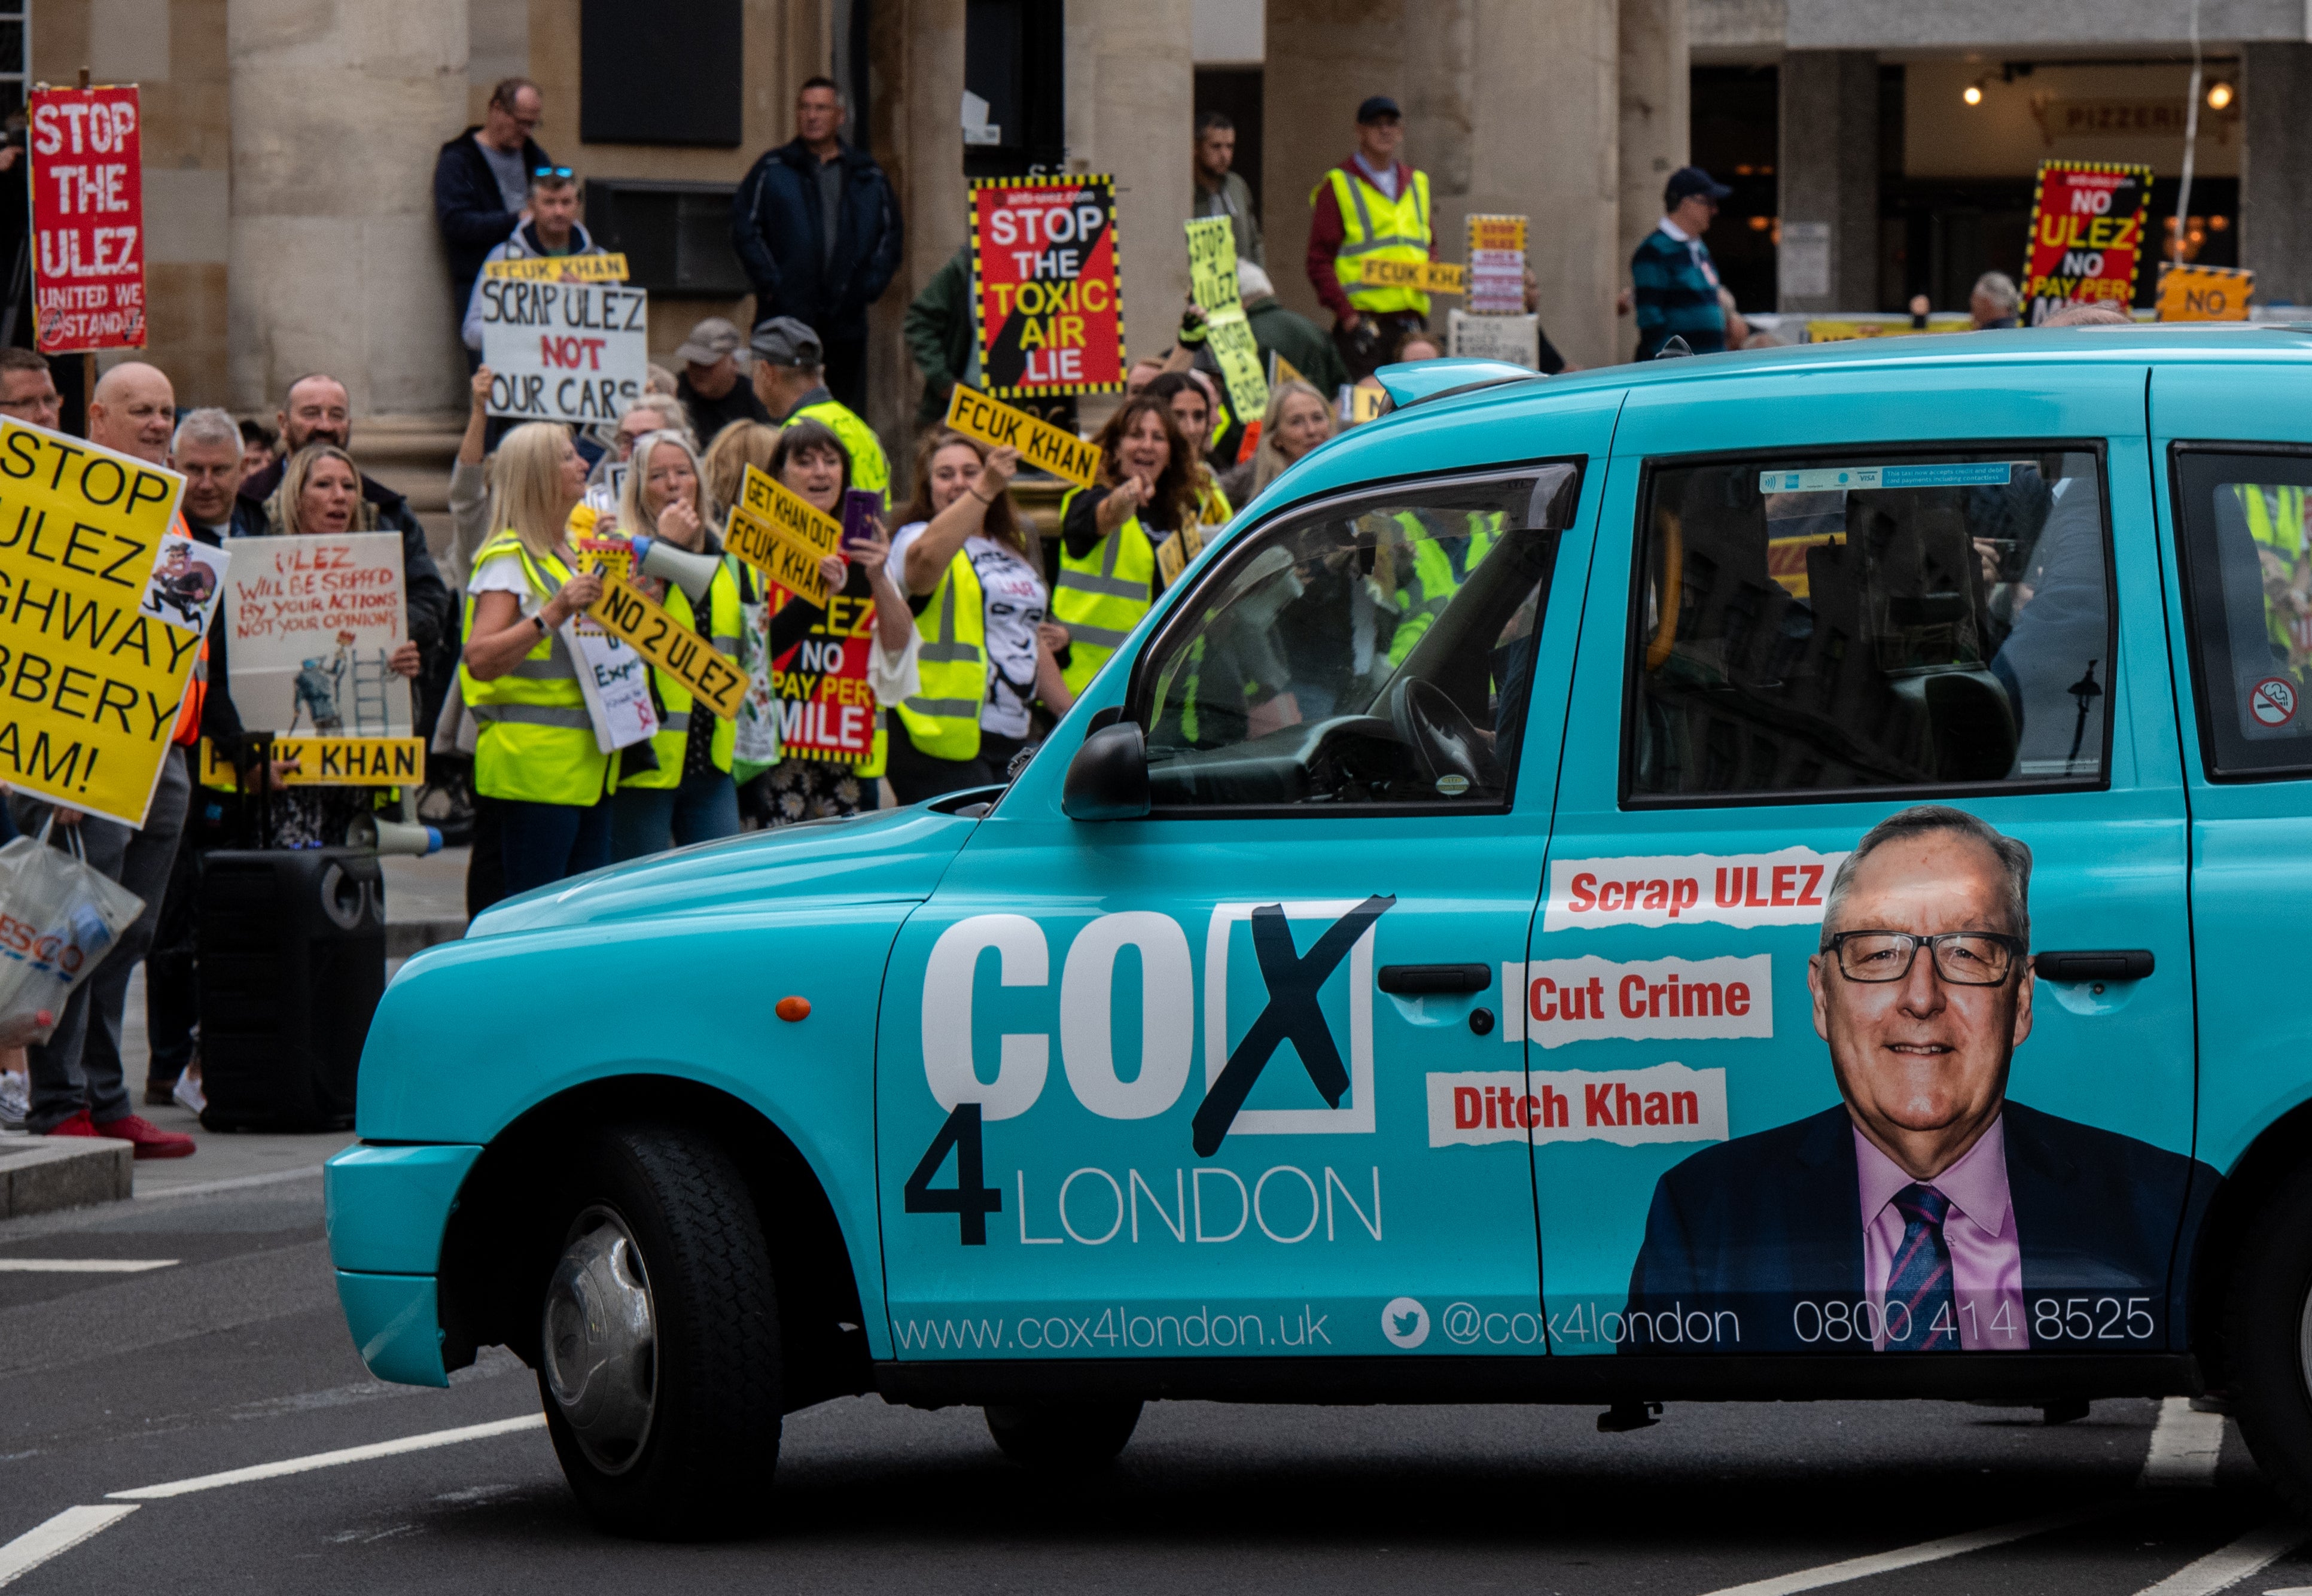 A taxi with an advert for Howard Cox